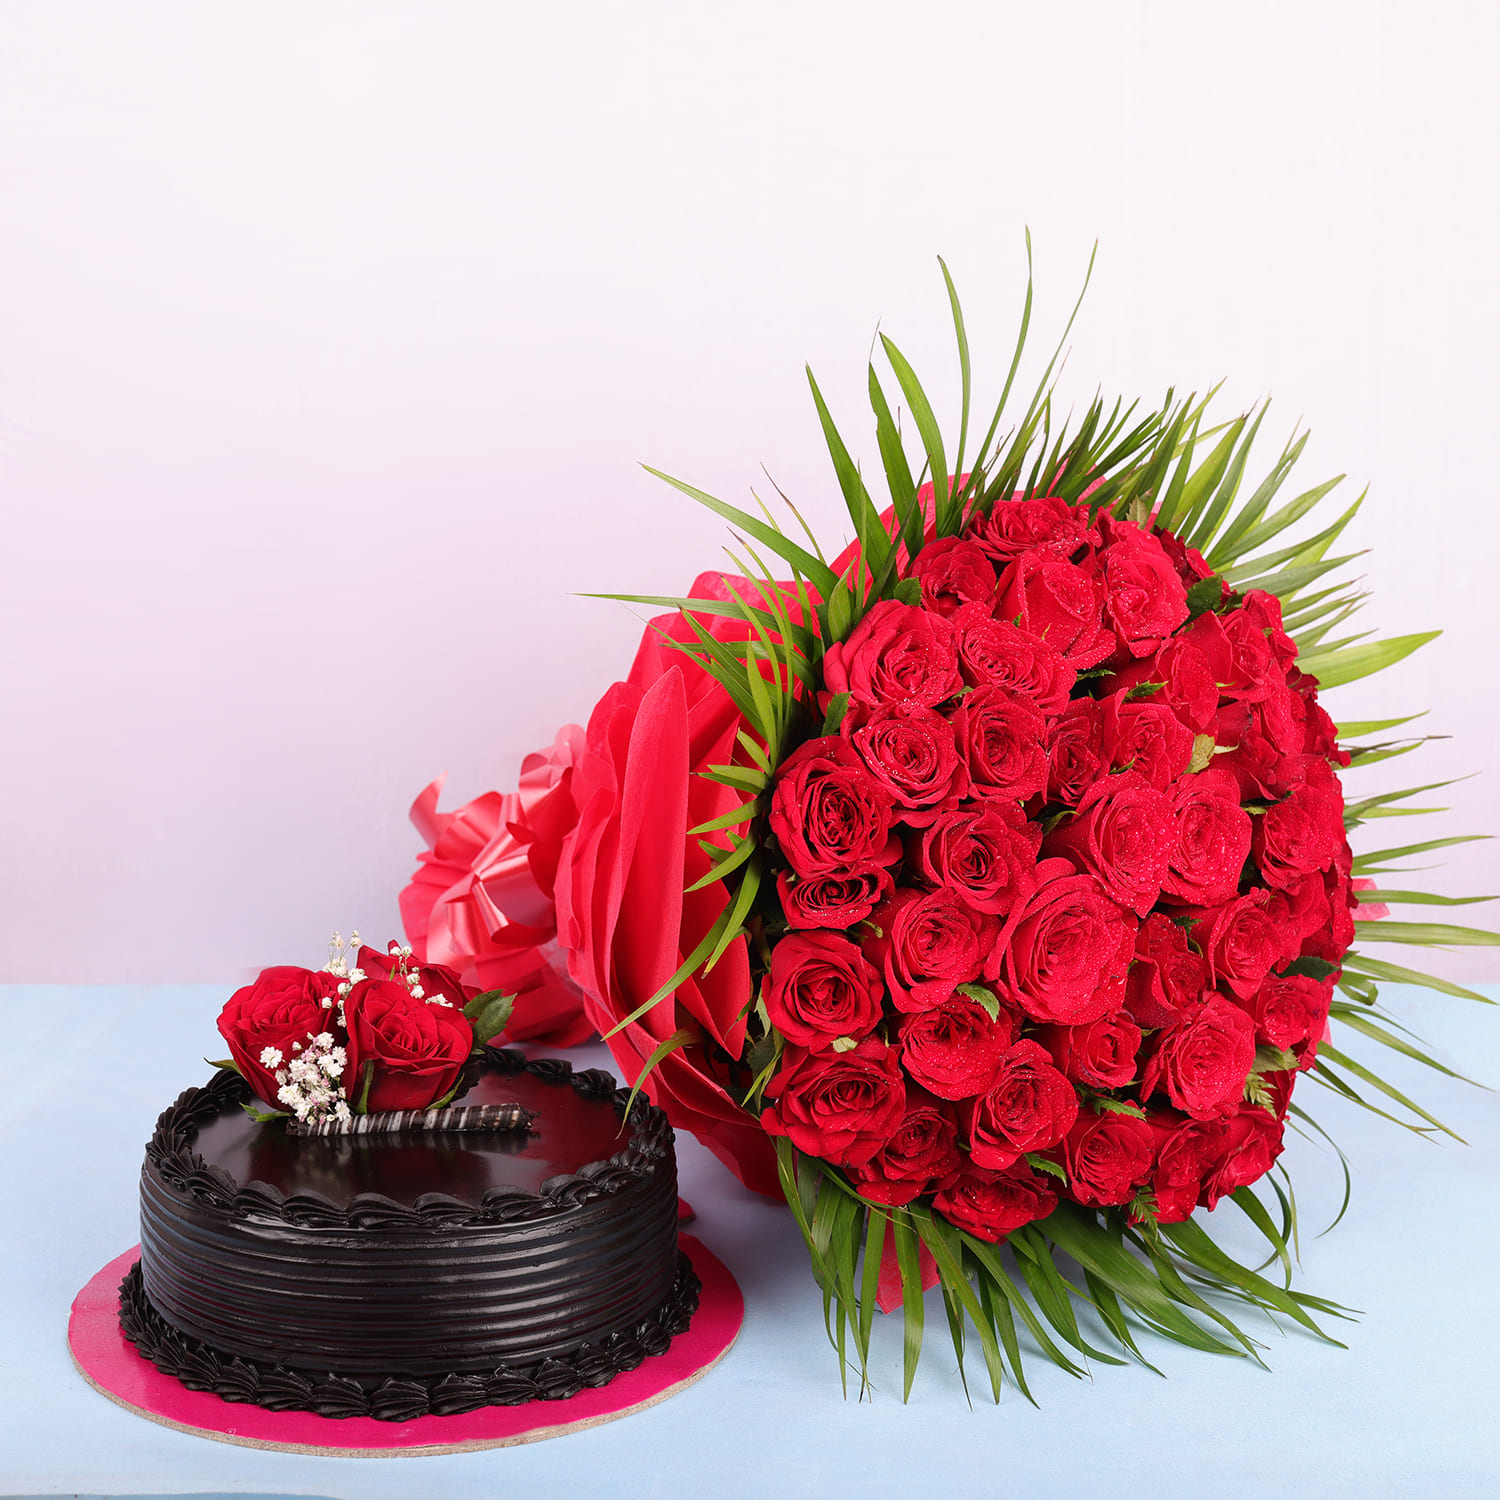 Online Flower & Cake Delivery in Indore | Send flowers N cake in 2 hours